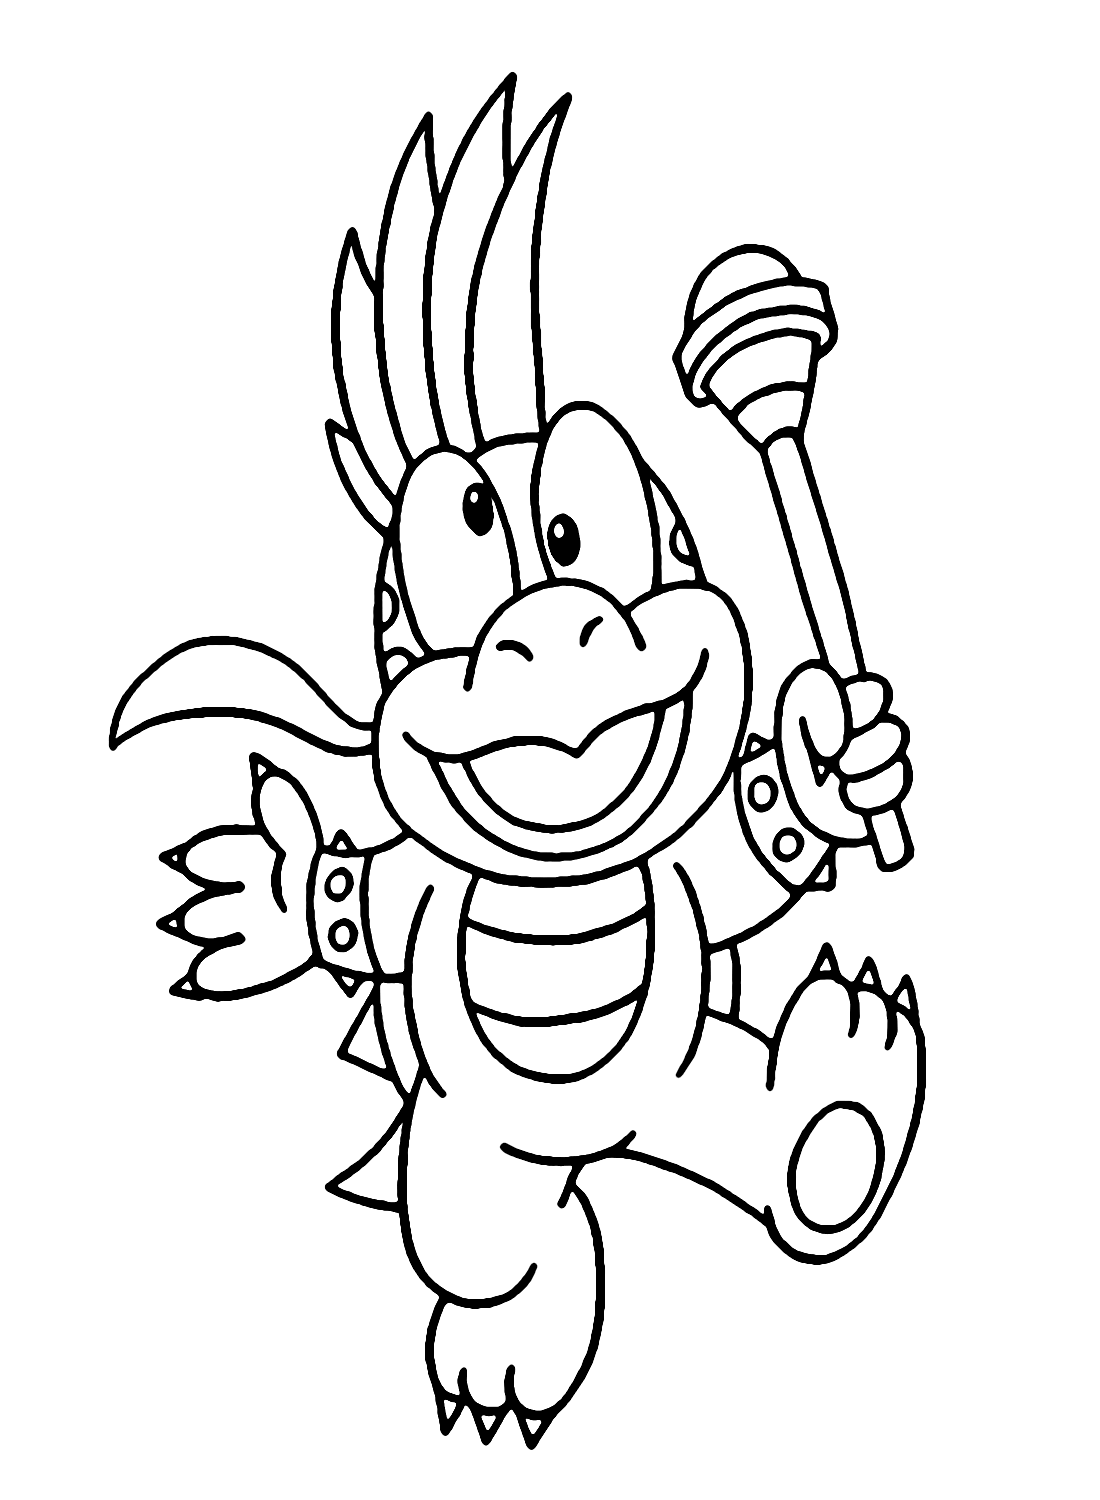 Lemmy Mario Coloring Page